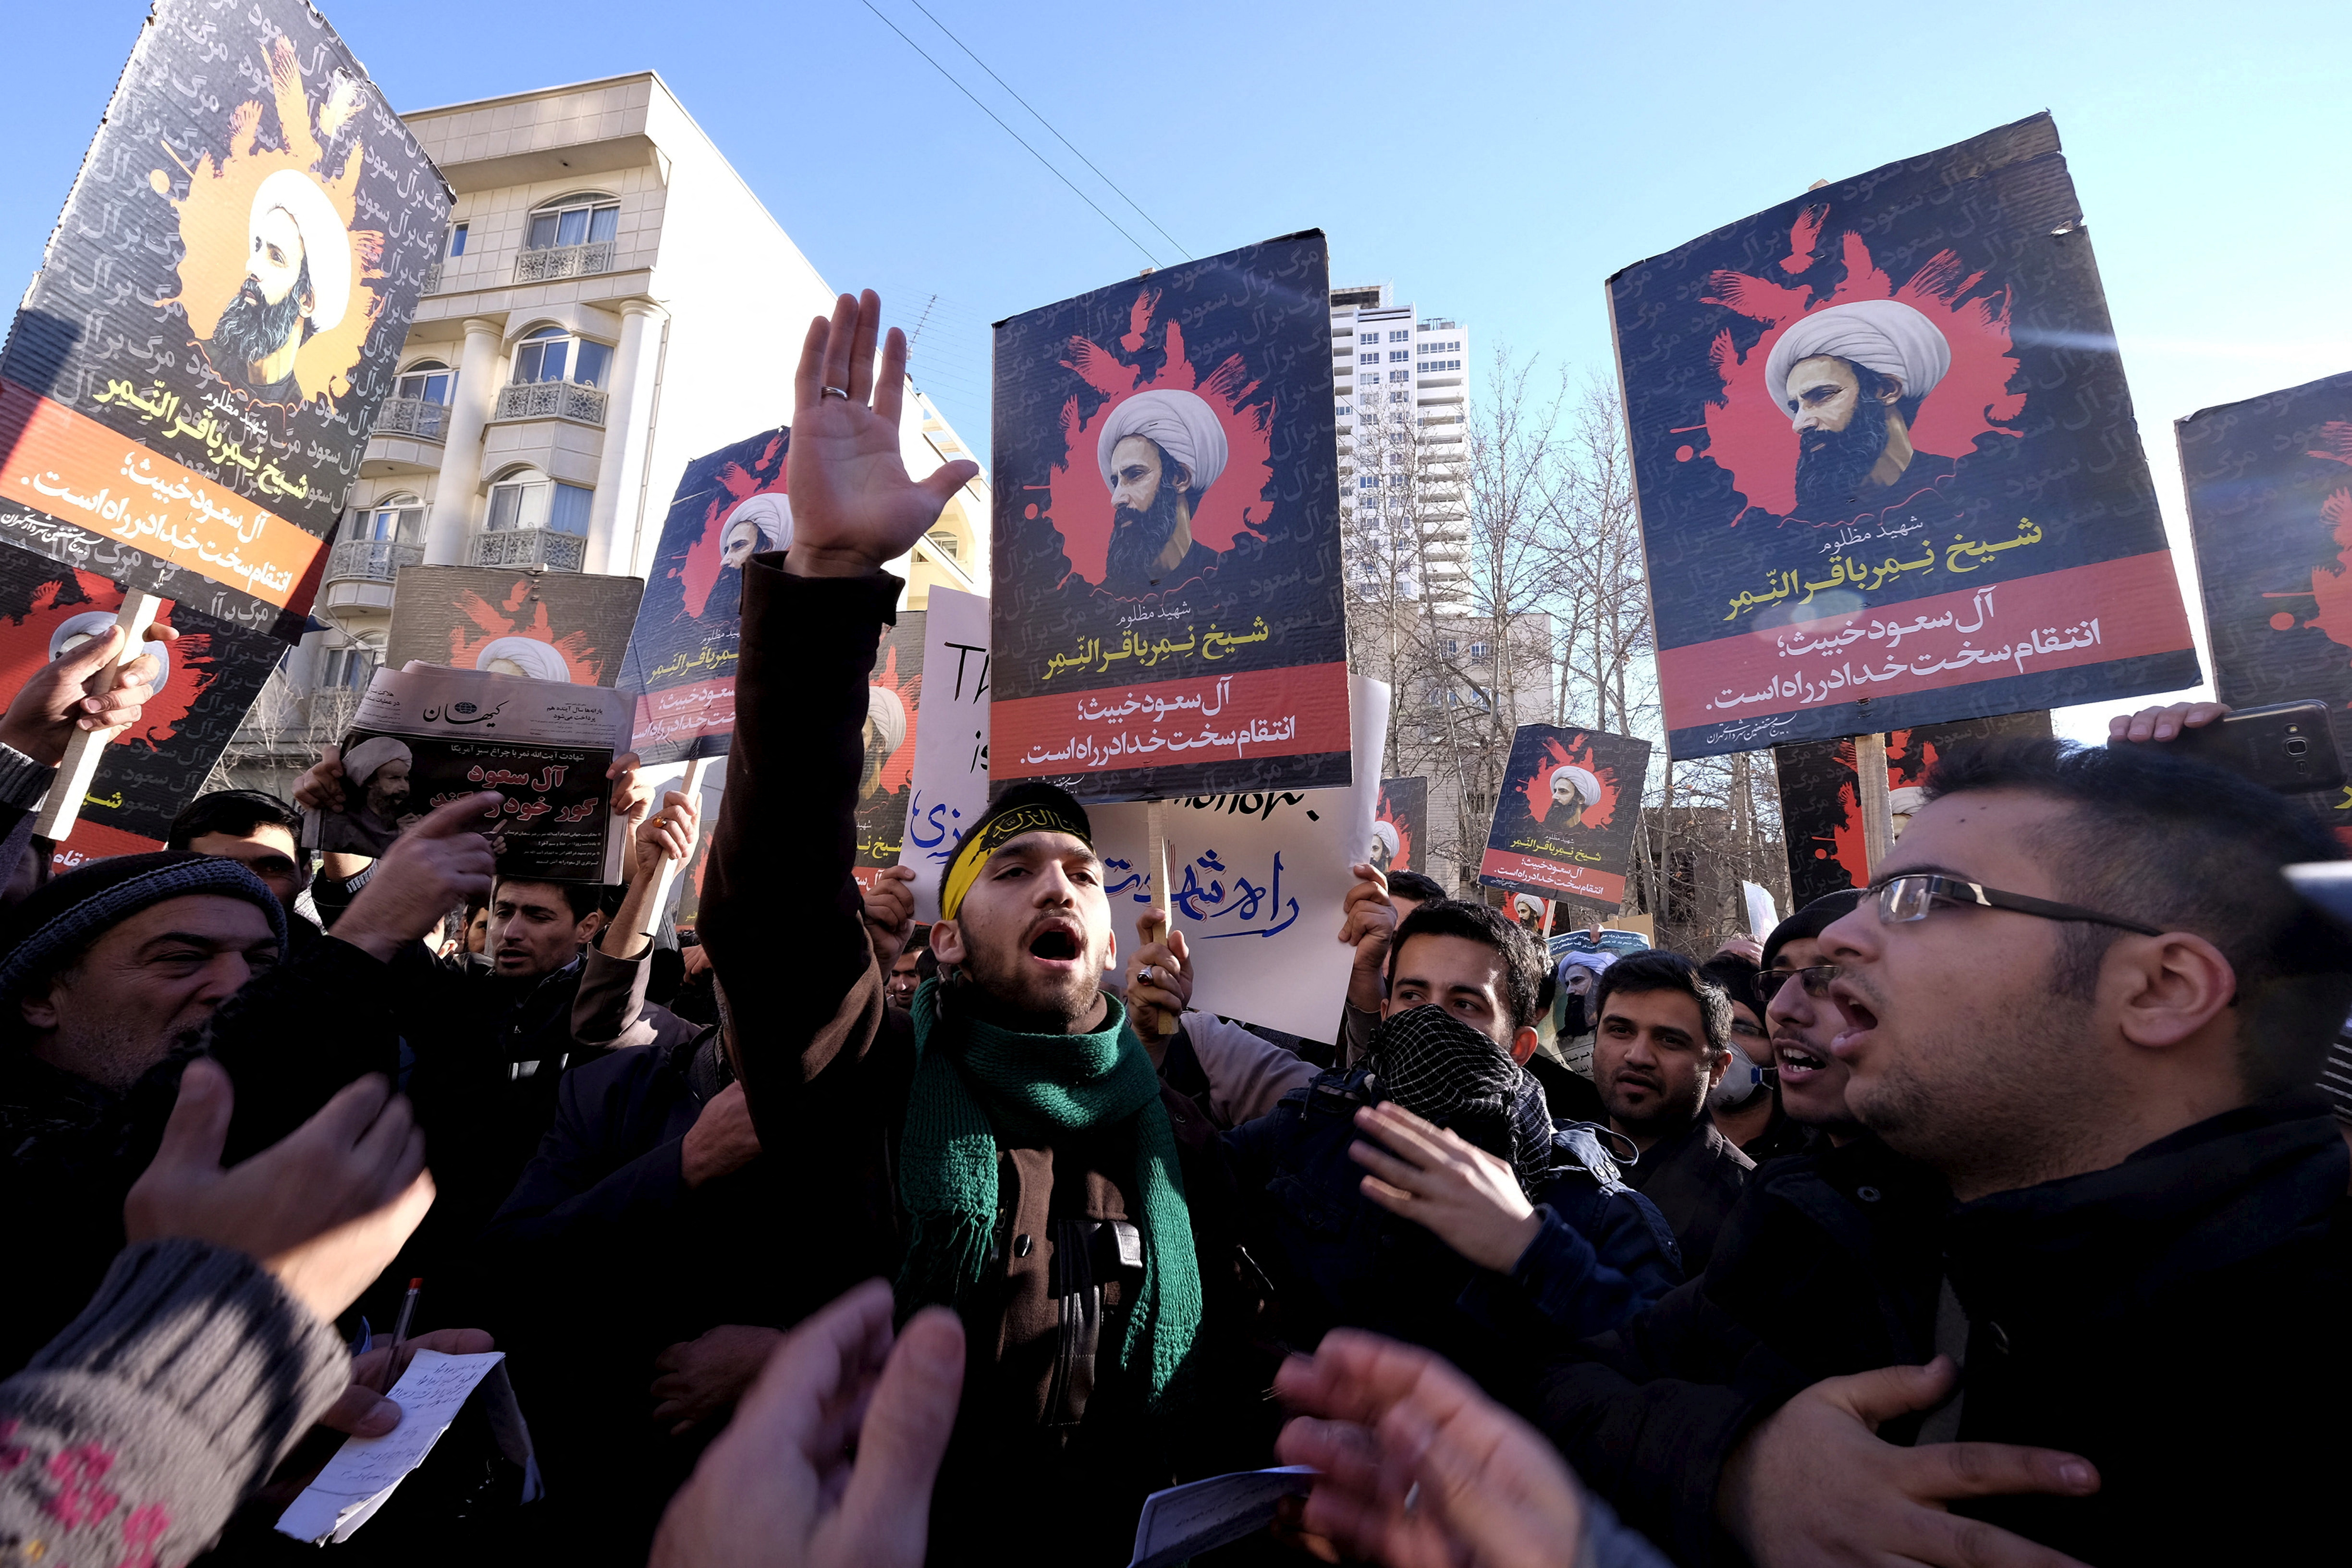 Iranian protesters chant slogans as they hold pictures of Shi'ite cleric Sheikh Nimr al-Nimr during a demonstration against the execution of Nimr in Saudi Arabia, outside the Saudi Arabian Embassy in Tehran